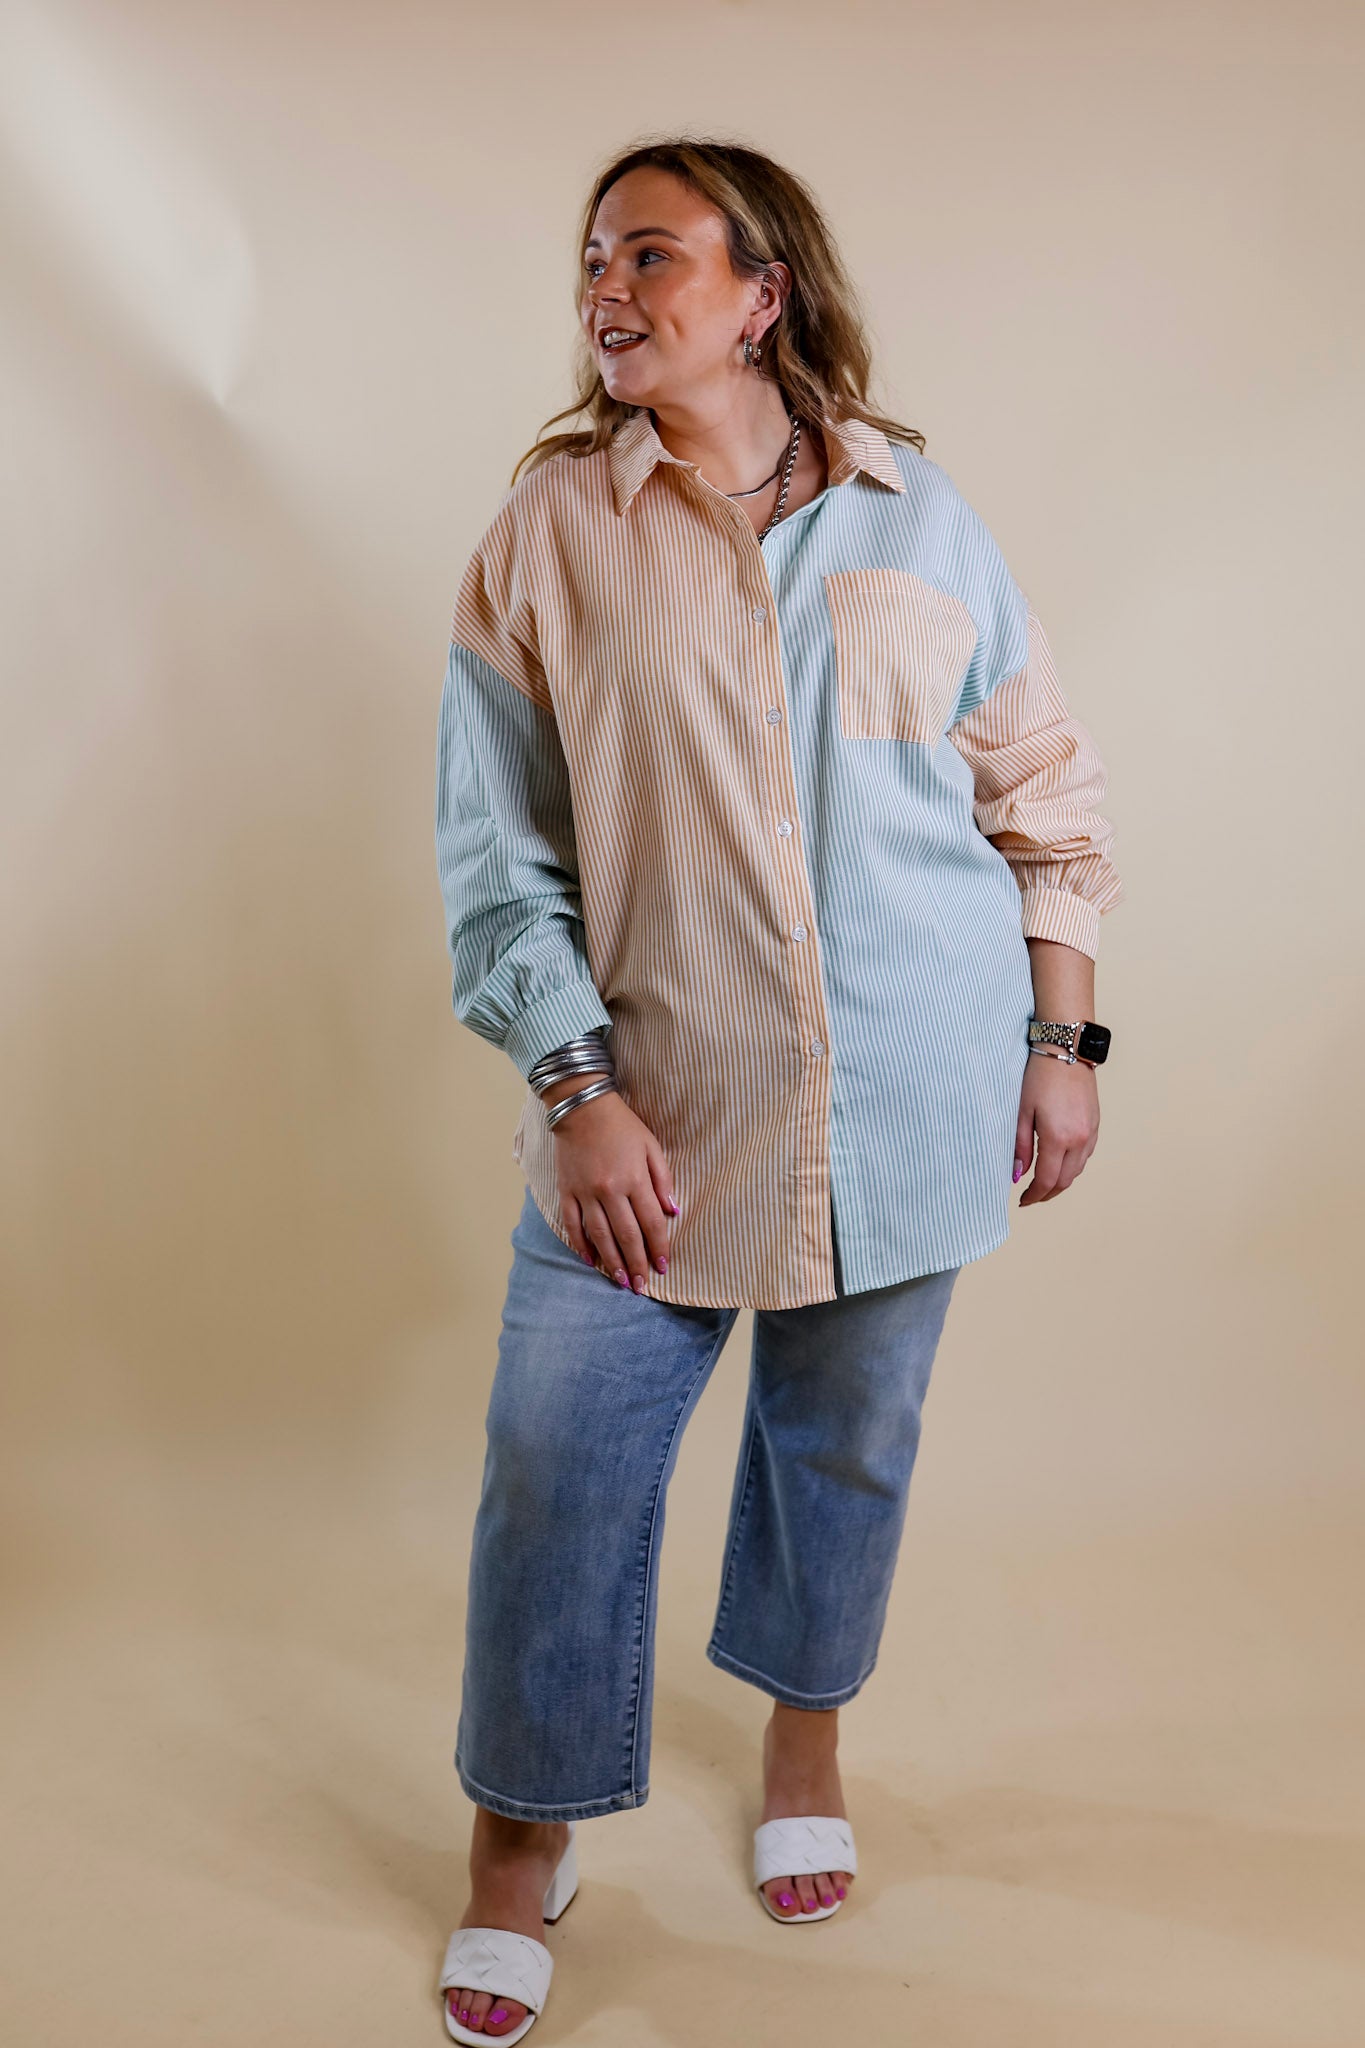 Simply Polished Pin Stripe Long Sleeve Button Up Top in Sage Green and Mustard Yellow - Giddy Up Glamour Boutique